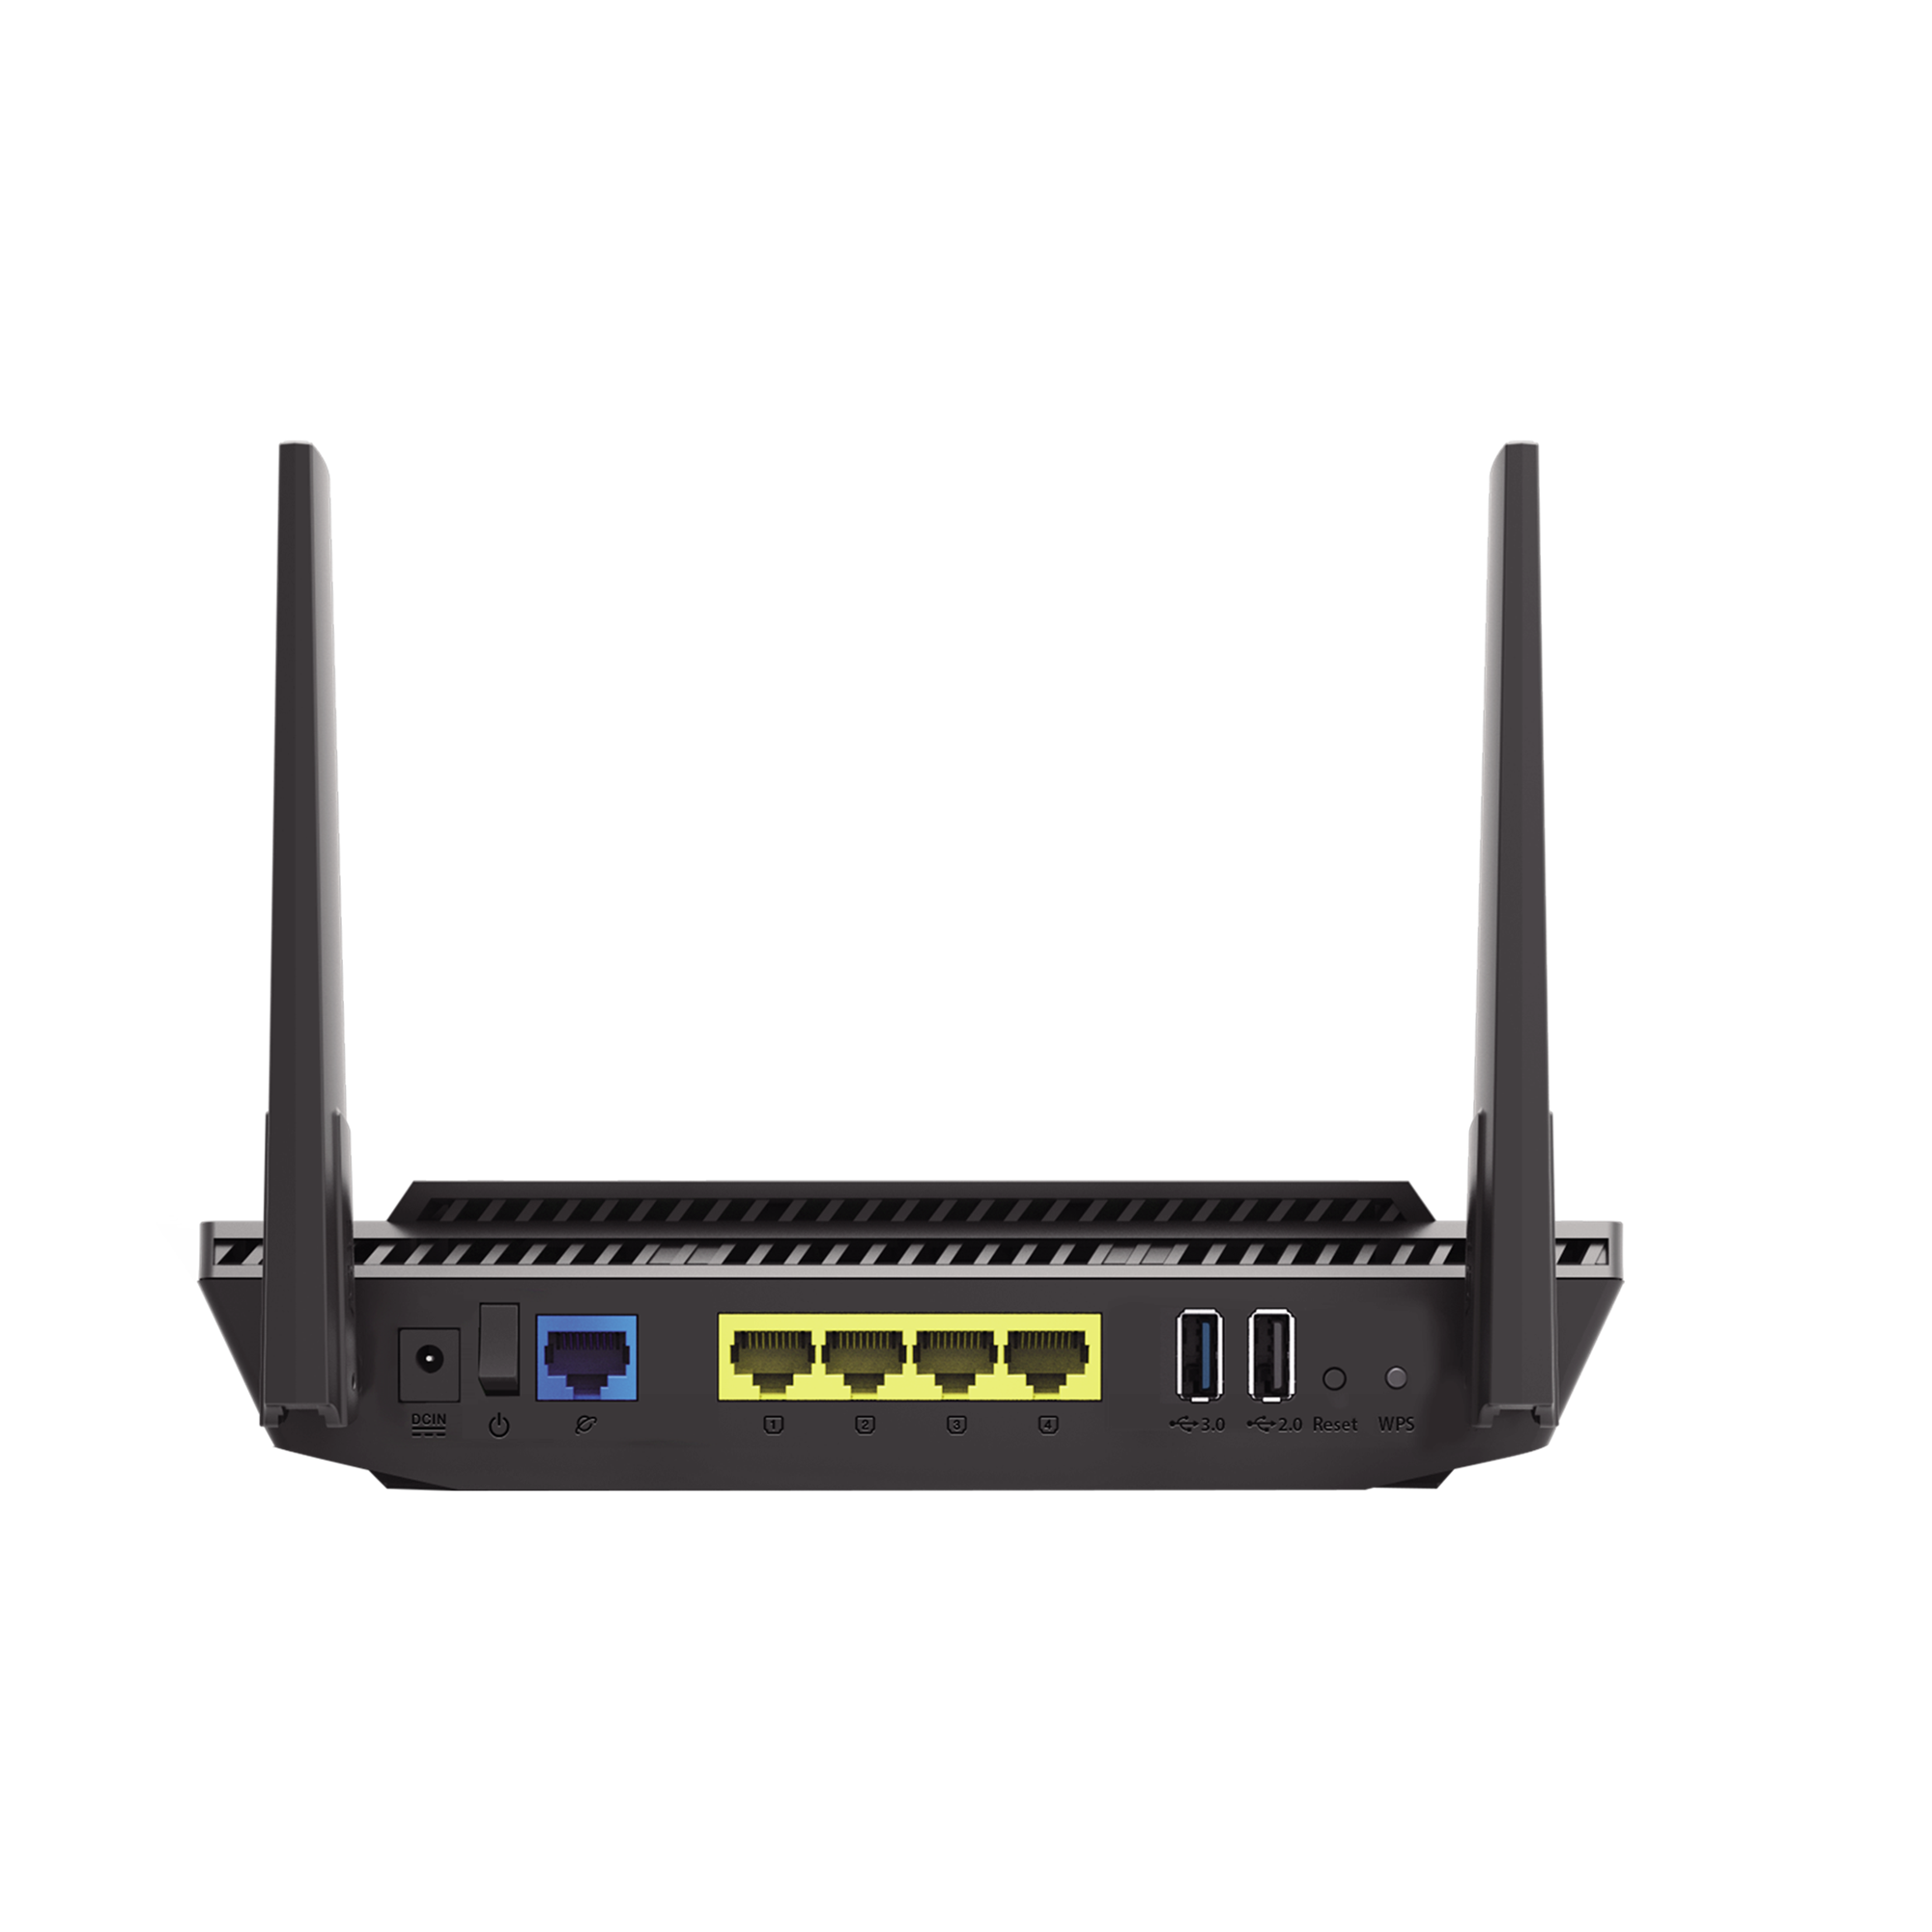 RT-BE96U｜WiFi Routers｜ASUS USA